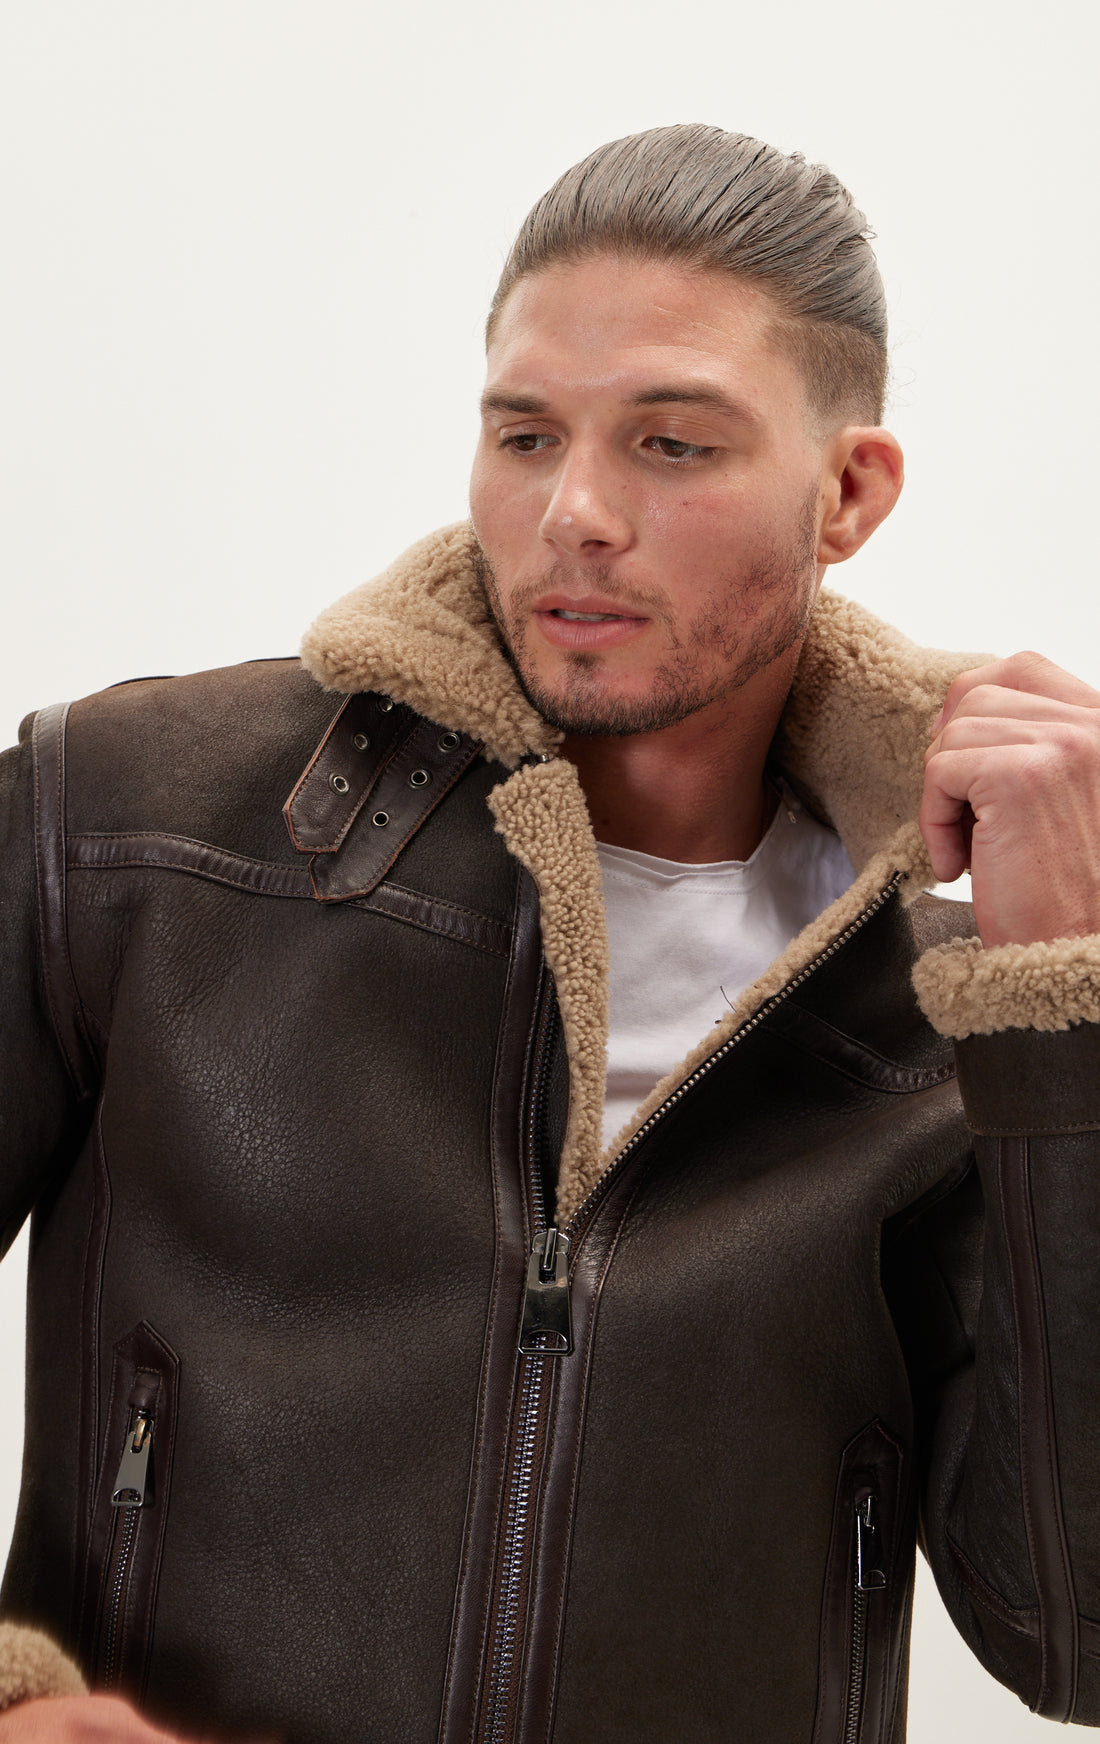 Shearling Lined Leather Jacket - Brown